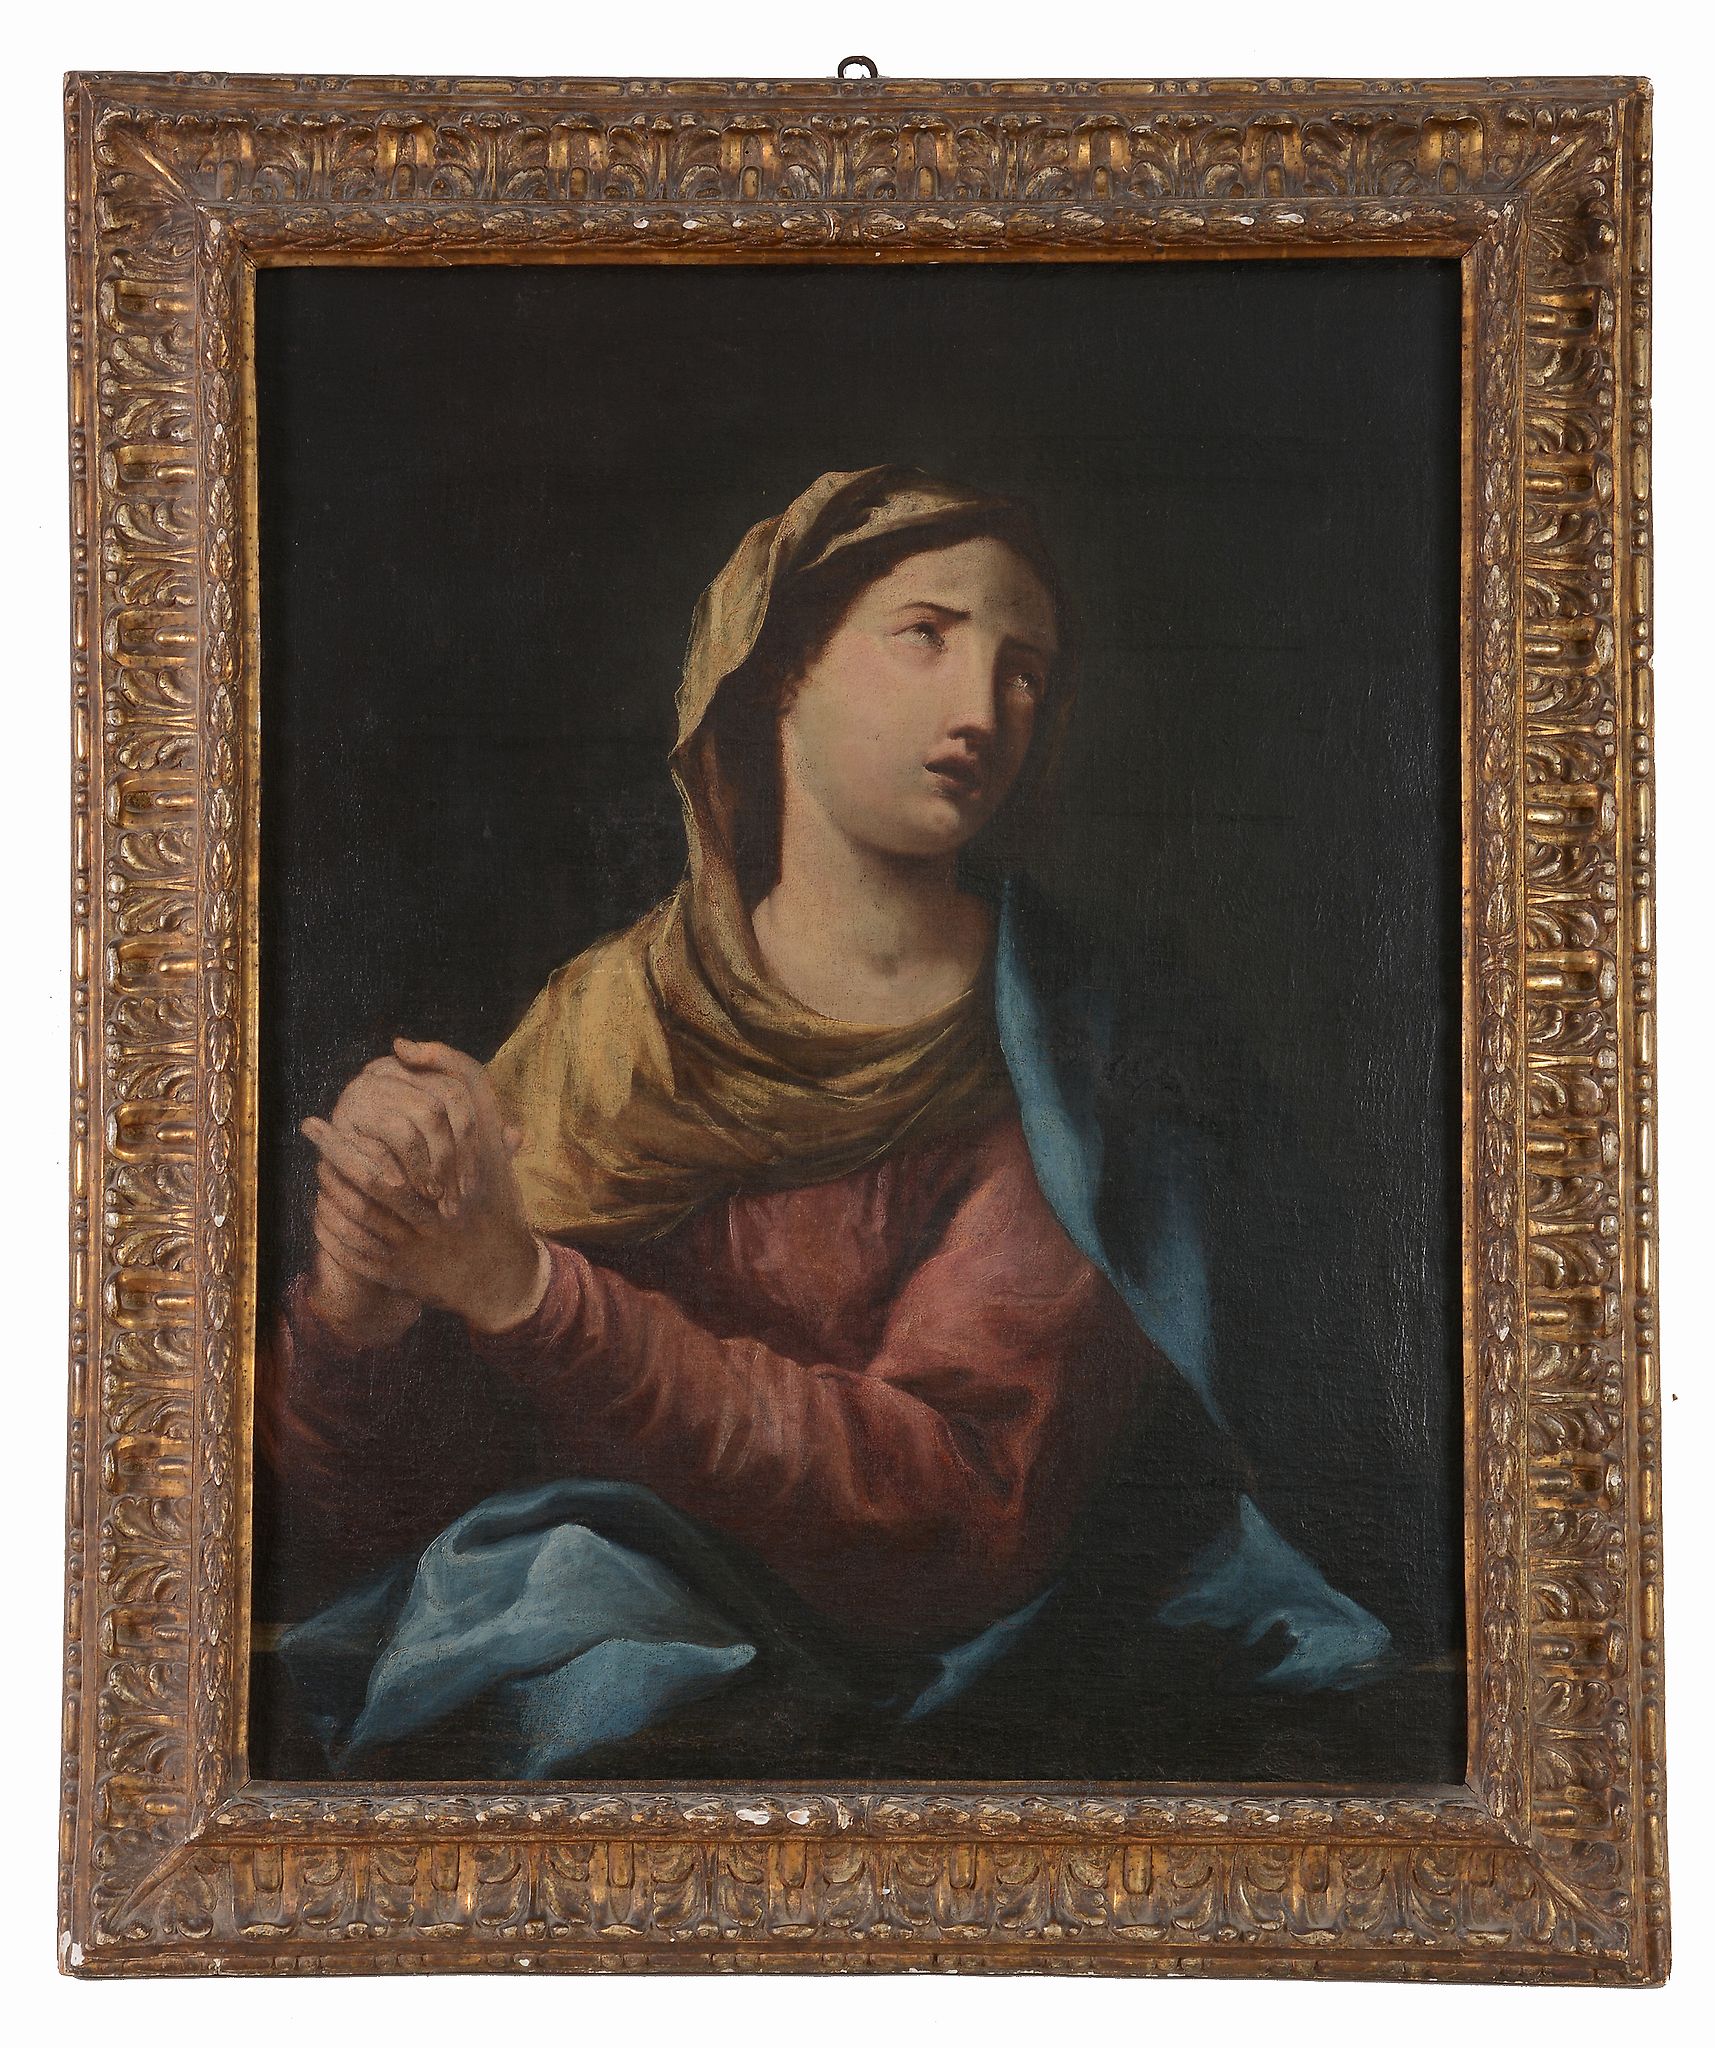 Manner of Guido Reni (1575-1642) - The Penitent Magdalene Oil on canvas 92 x 74 cm. (36 1/8 x 29 1/2 - Image 2 of 2